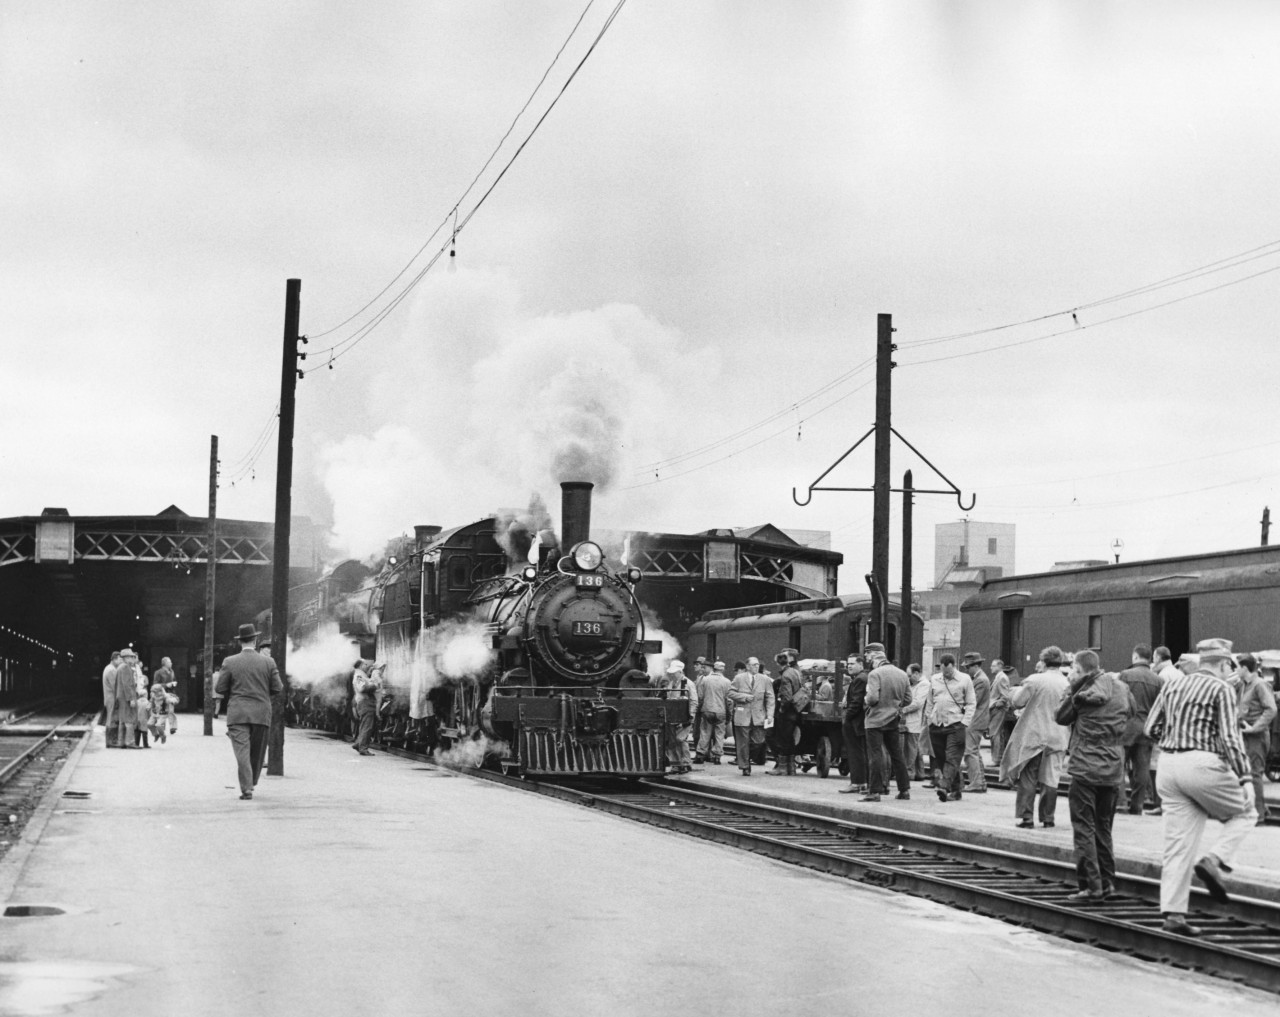 It is shortly before 10:45 A.M. on a cool, grey day Sunday May 1st.1960. A day that would go down in history. Billed as "An Old Fashioned Springtime Excursion" it would later become known far and wide as the"Tripleheader".  The steam era was drawing to a close and railfan clubs were operating excursions, usually with one locomotive and sometimes with two, but never before were three locomotives used! They were required to haul the heavy train up the steep grade between Forks of Credit and Cataract on the way to Orangeville. A record 14 cars and a record passenger count of 1,057 paying passengers. This matched the engine number 1057! Pass holders and small children along with railway personnel brought the total to over 1100. Hundred more were turned away! The engines could haul no more cars so the ticket sales were cut off two weeks in advance also something unheard of. 

Today I am celebrating my birthday by making my first contribution to this excellent website. Raymond L. Kennedy